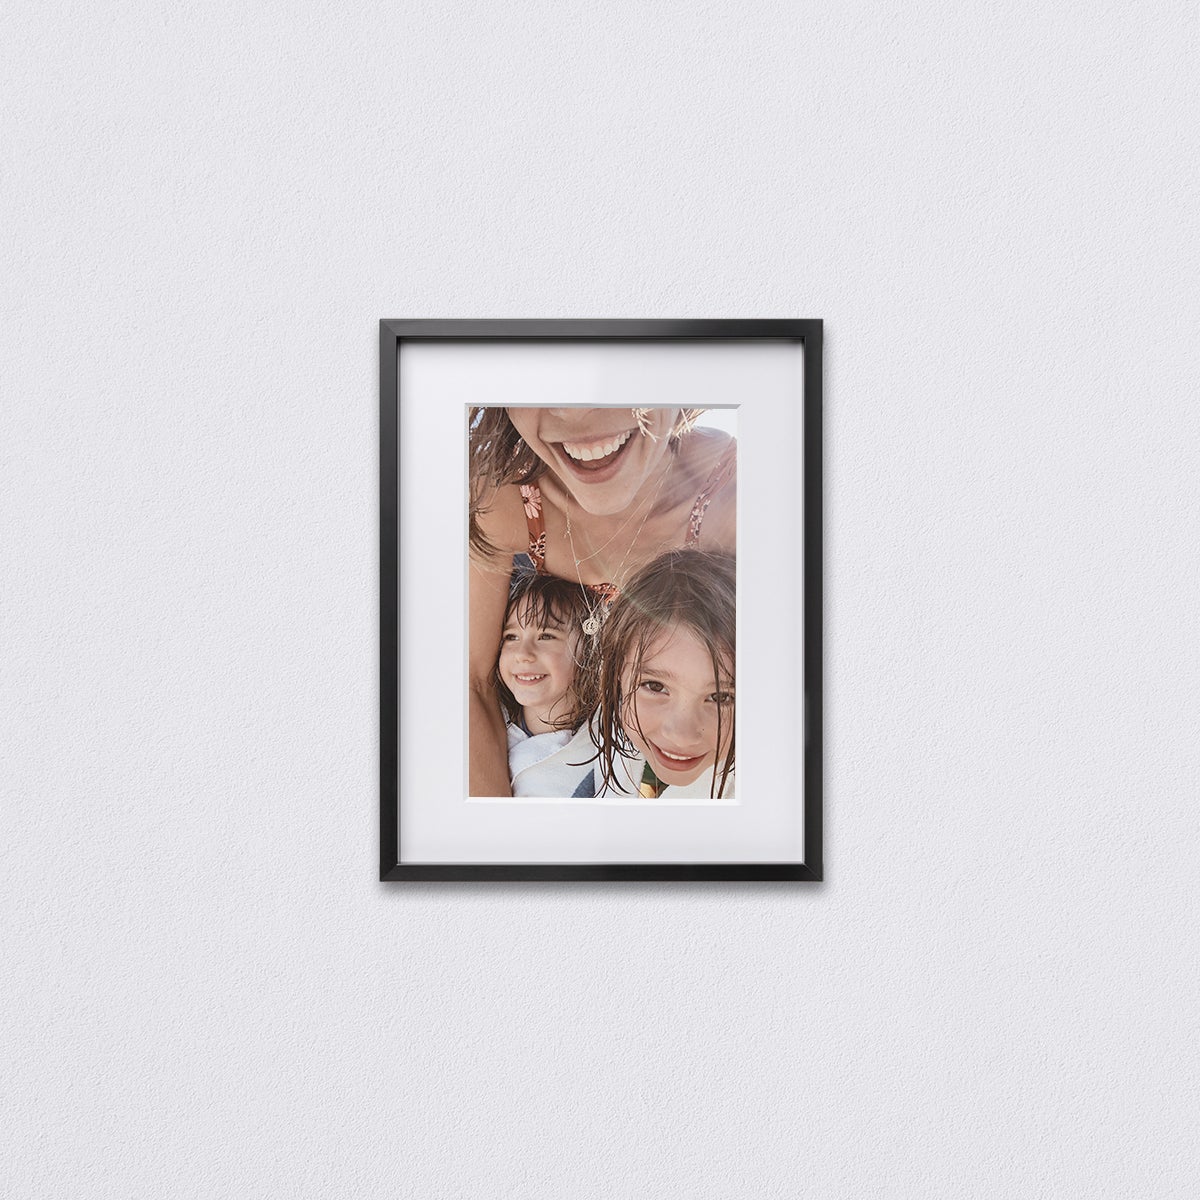 11 x 14 inch Artifact Uprising Modern Metal Frame featuring selfie of mom and two kids matted to 8 x 11 inch